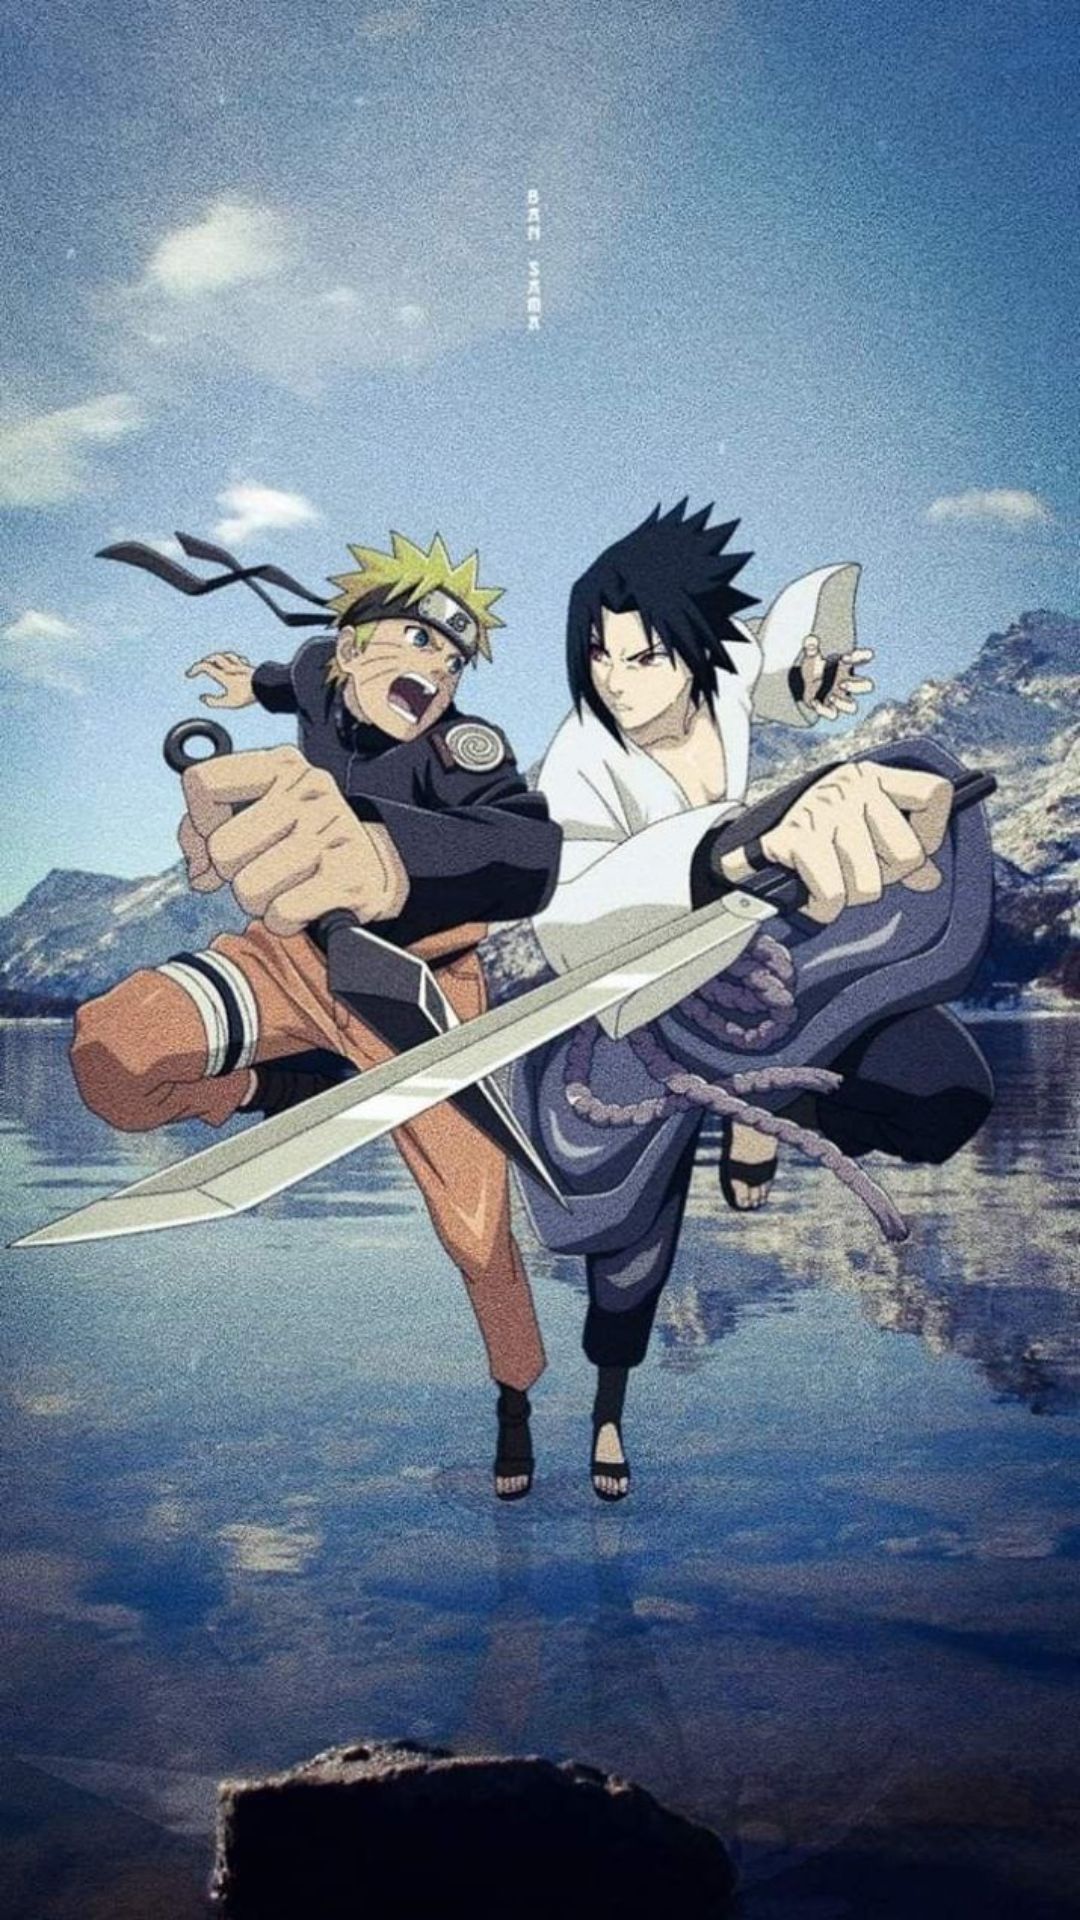 Naruto and Sasuke wallpaper for iPhone with high-resolution 1080x1920 pixel. You can use this wallpaper for your iPhone 5, 6, 7, 8, X, XS, XR backgrounds, Mobile Screensaver, or iPad Lock Screen - Naruto